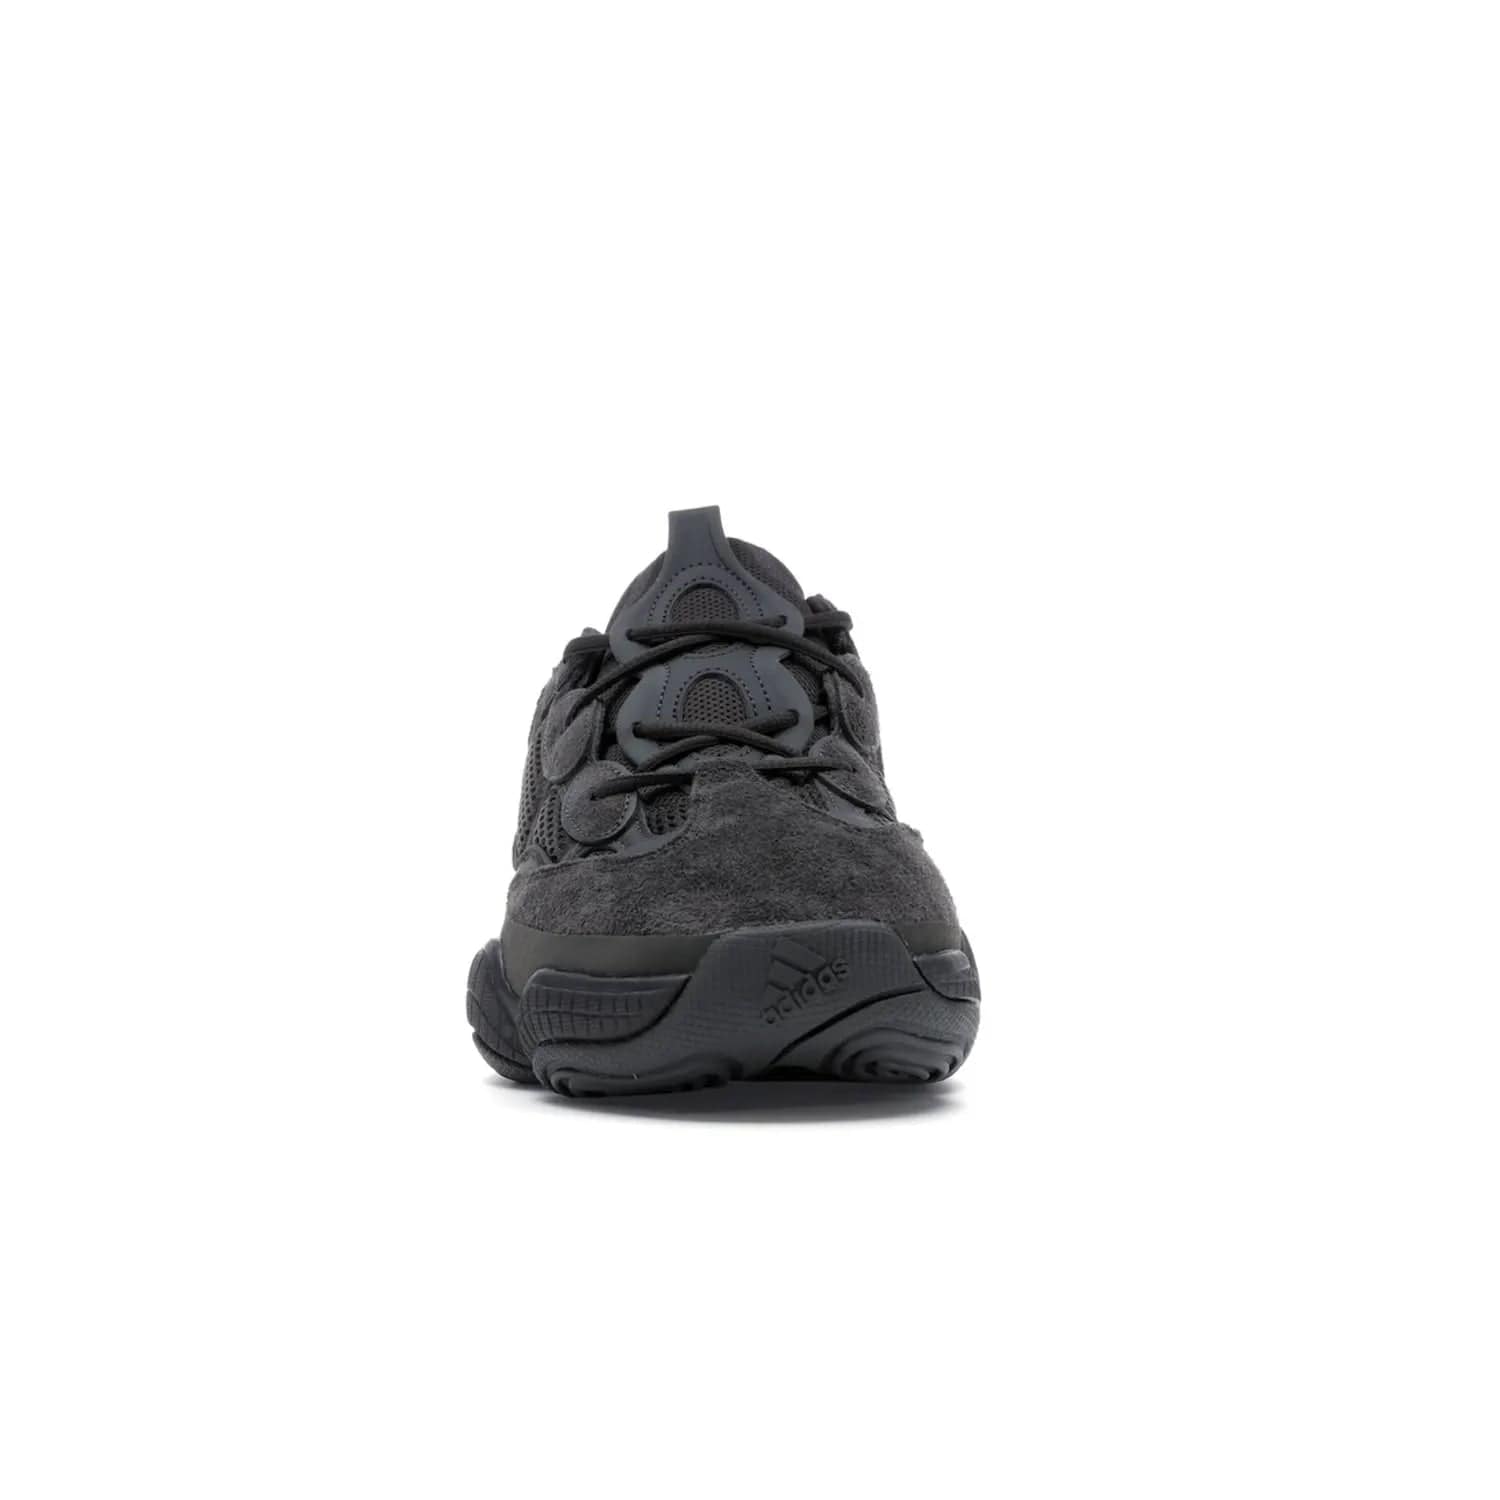 adidas Yeezy 500 Utility Black - Image 10 - Only at www.BallersClubKickz.com - Iconic adidas Yeezy 500 Utility Black in All-Black colorway. Durable black mesh and suede upper with adiPRENE® sole delivers comfort and support. Be unstoppable with the Yeezy 500 Utility Black. Released July 2018.